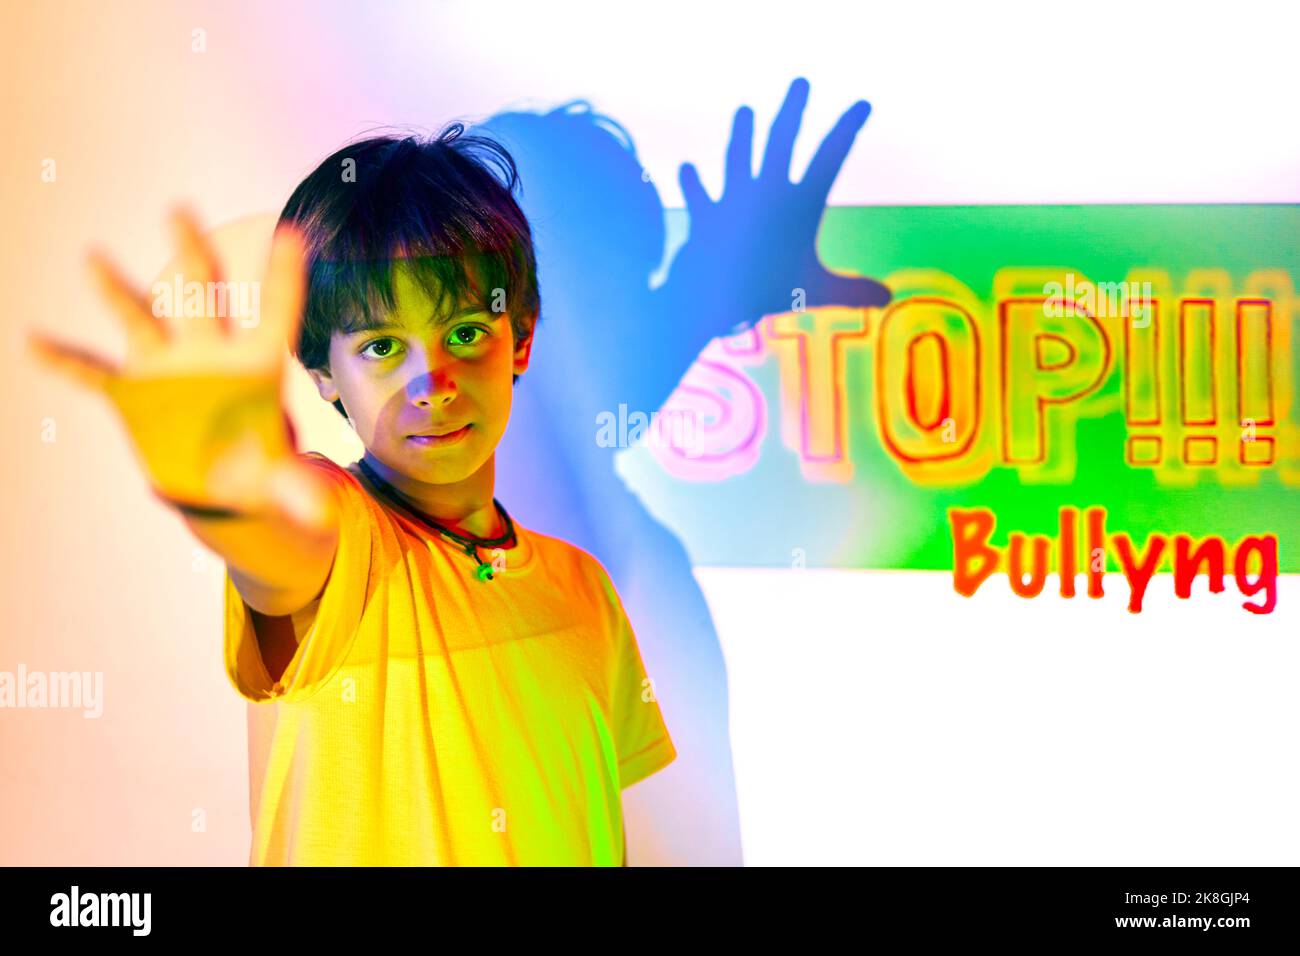 Serious Indian boy in yellow t shirt standing near white wall and outstretching arm showing no gesture against colorful neon stop bullying inscription Stock Photo